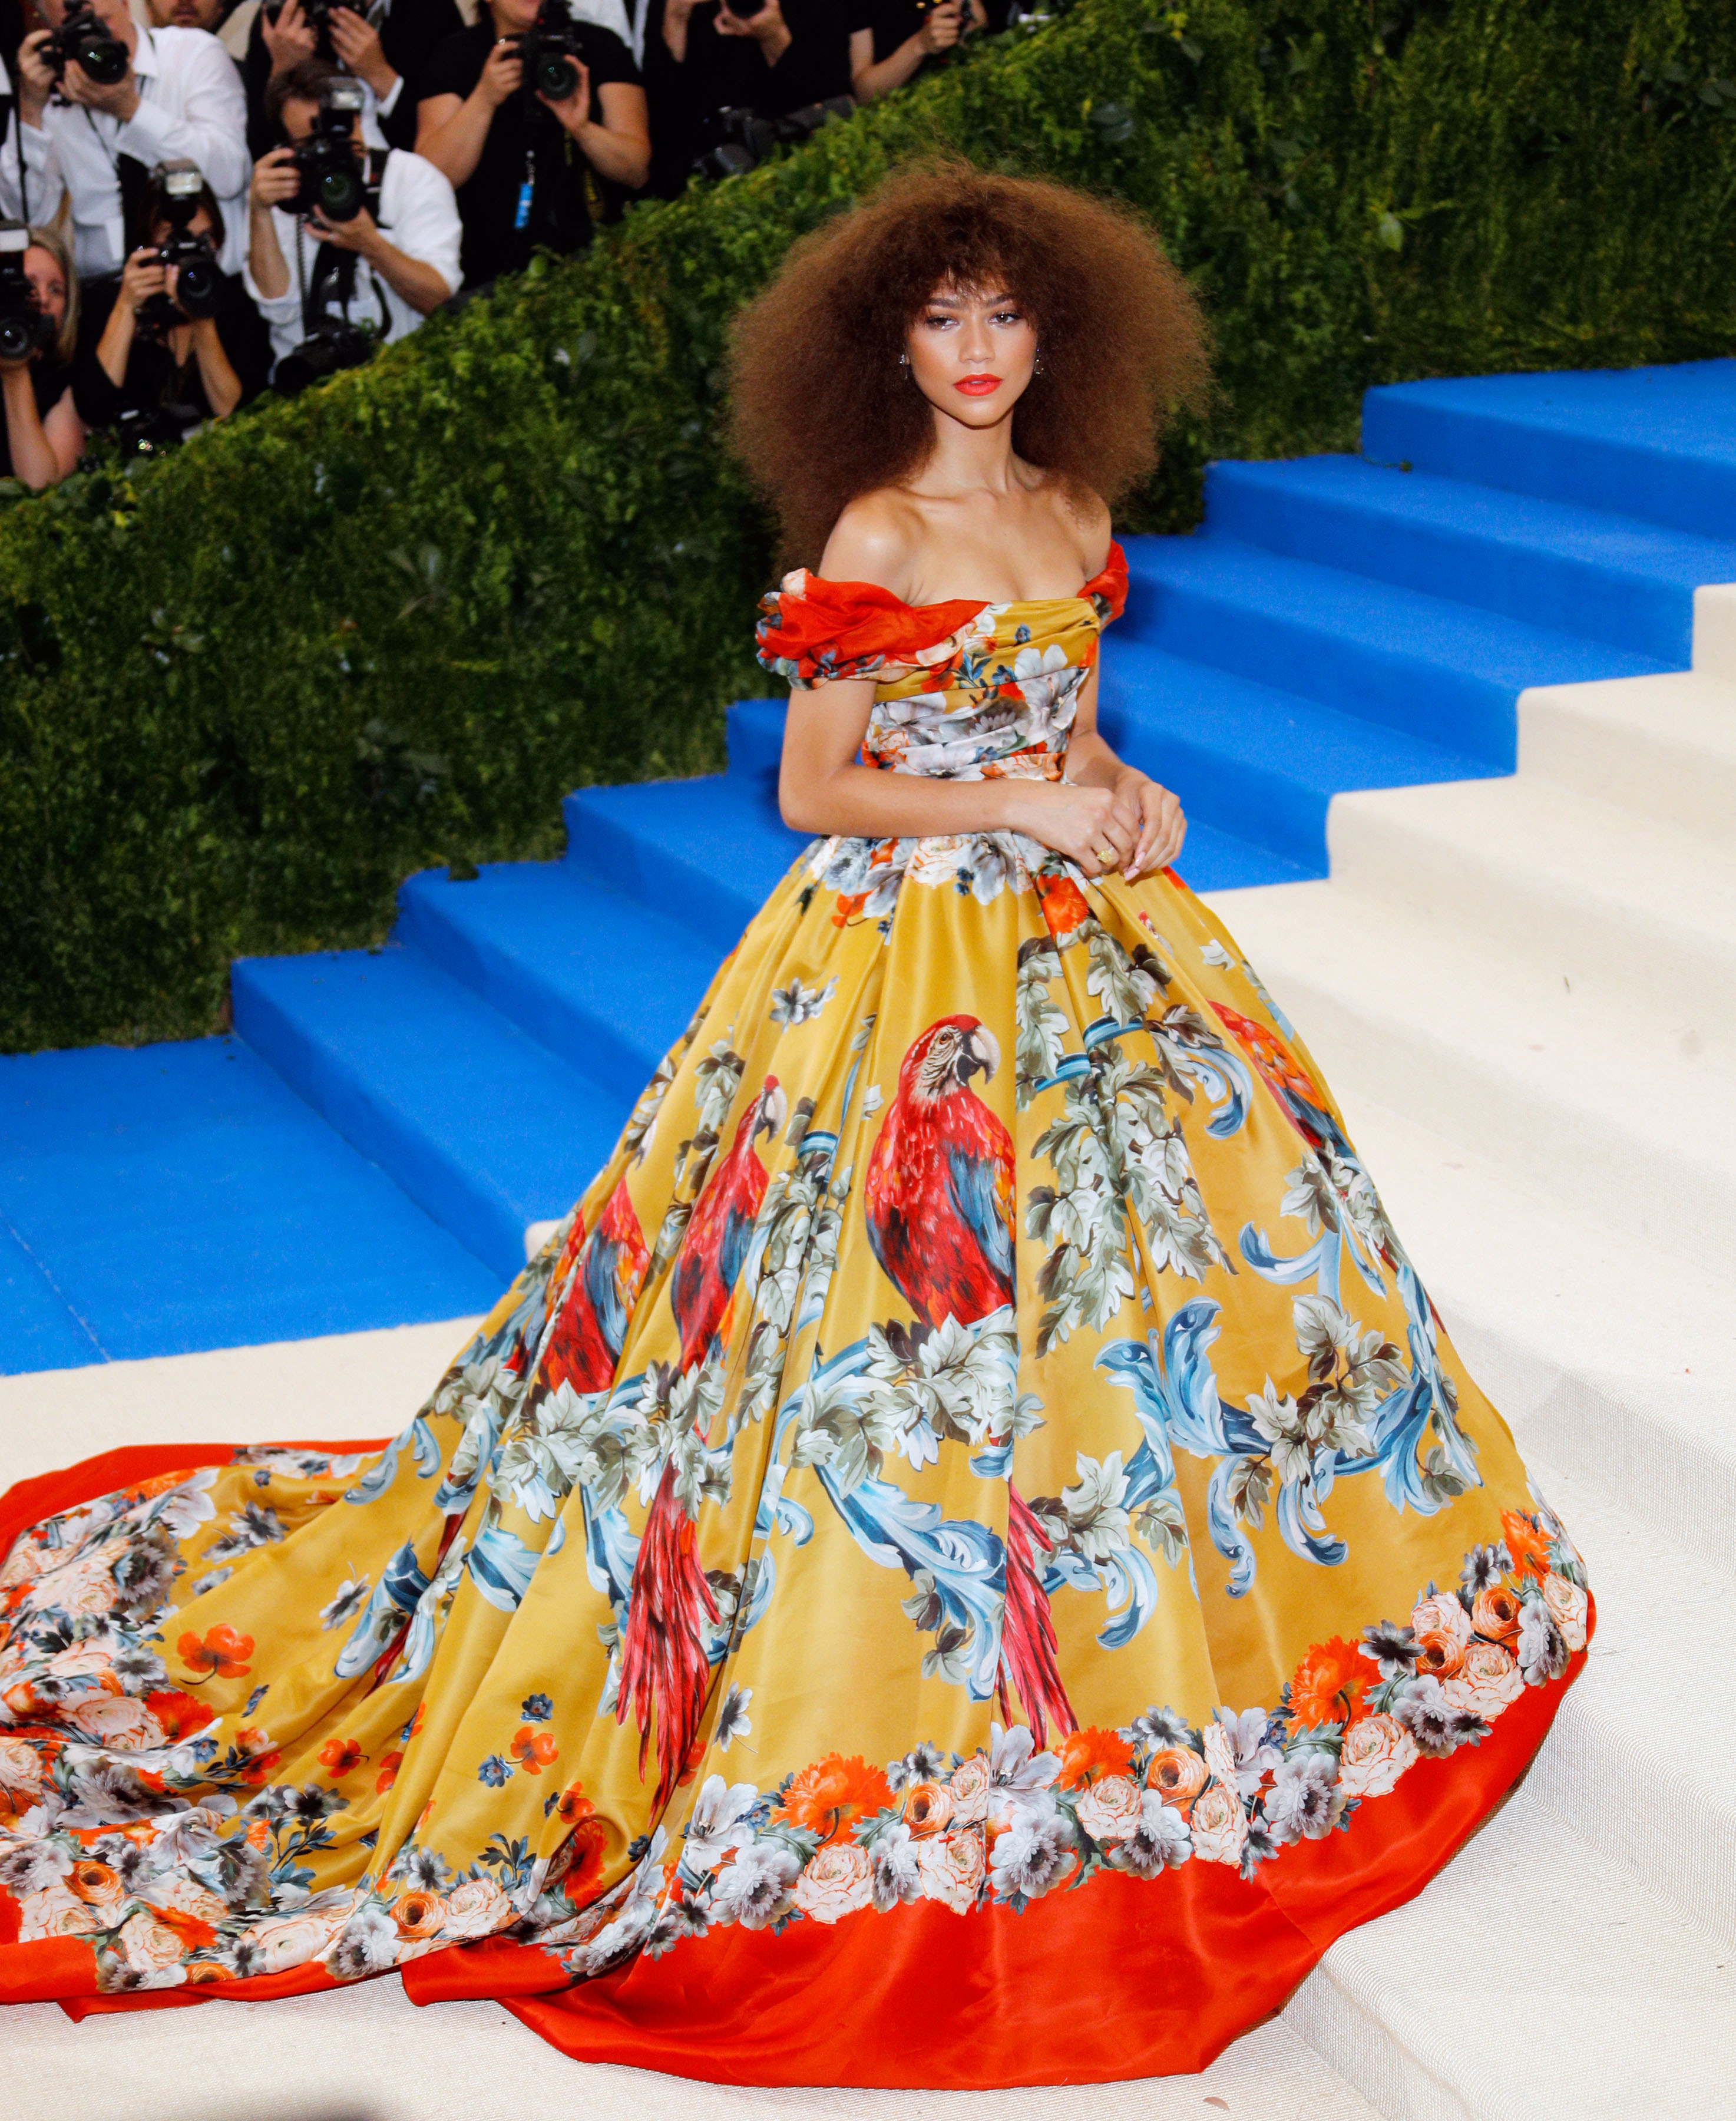 Zendaya in the multicolored gown with a parrot and flower design